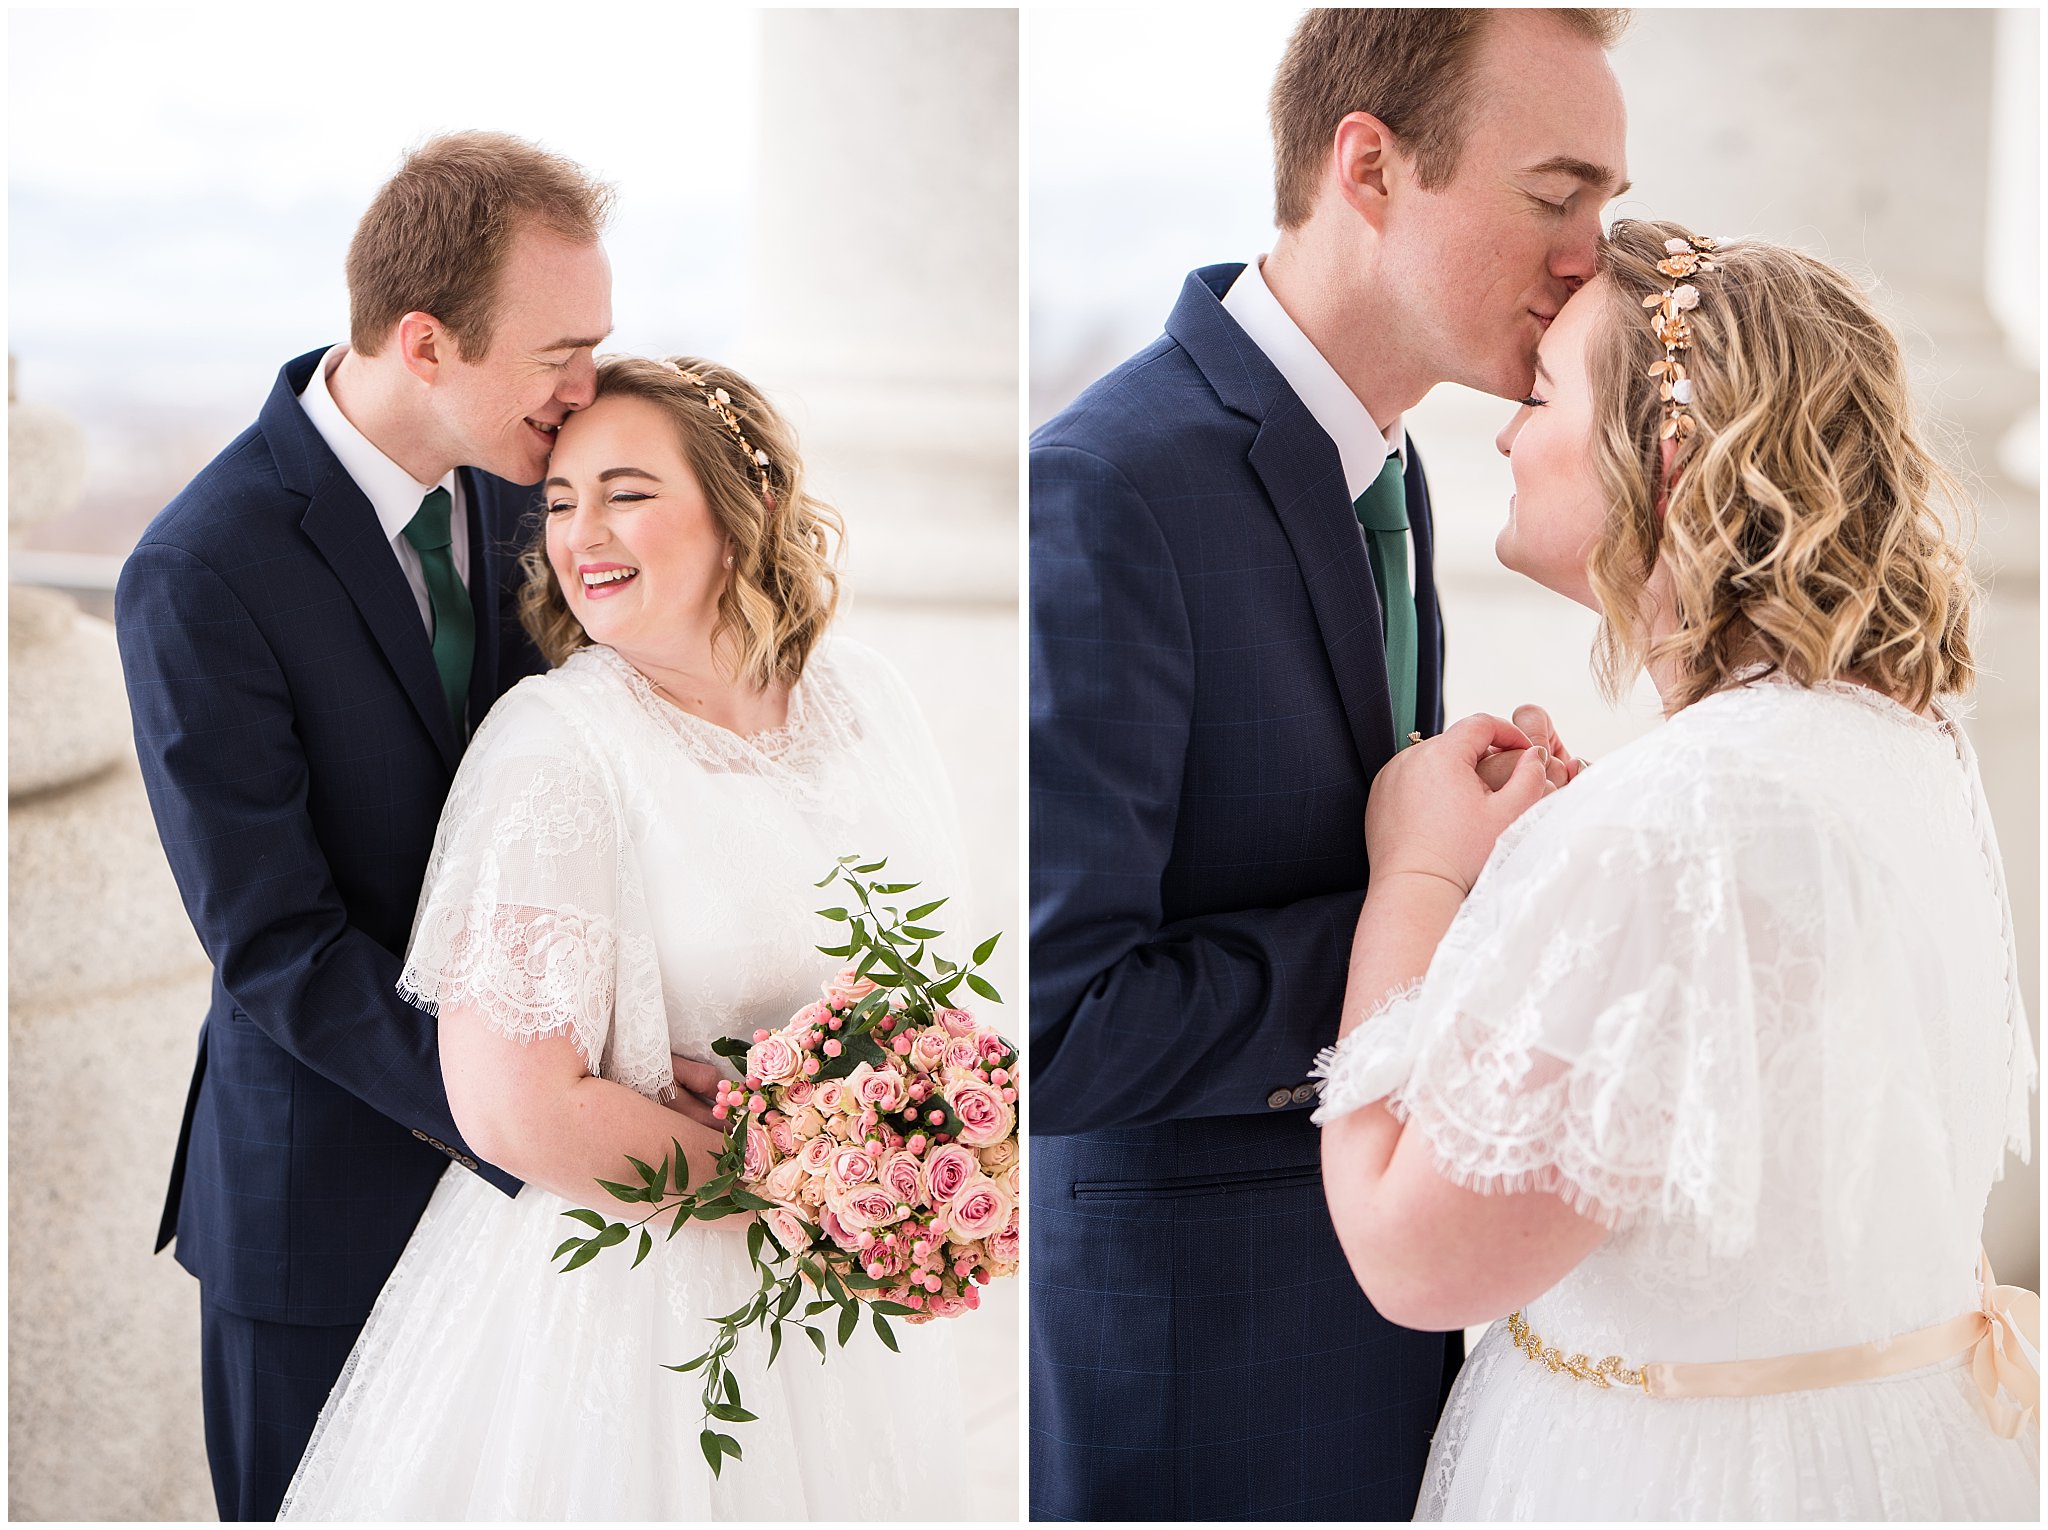 Groom kisses bride on forehead next to capitol columns | Winter Formals at the Utah State Capitol | Utah Wedding Photography